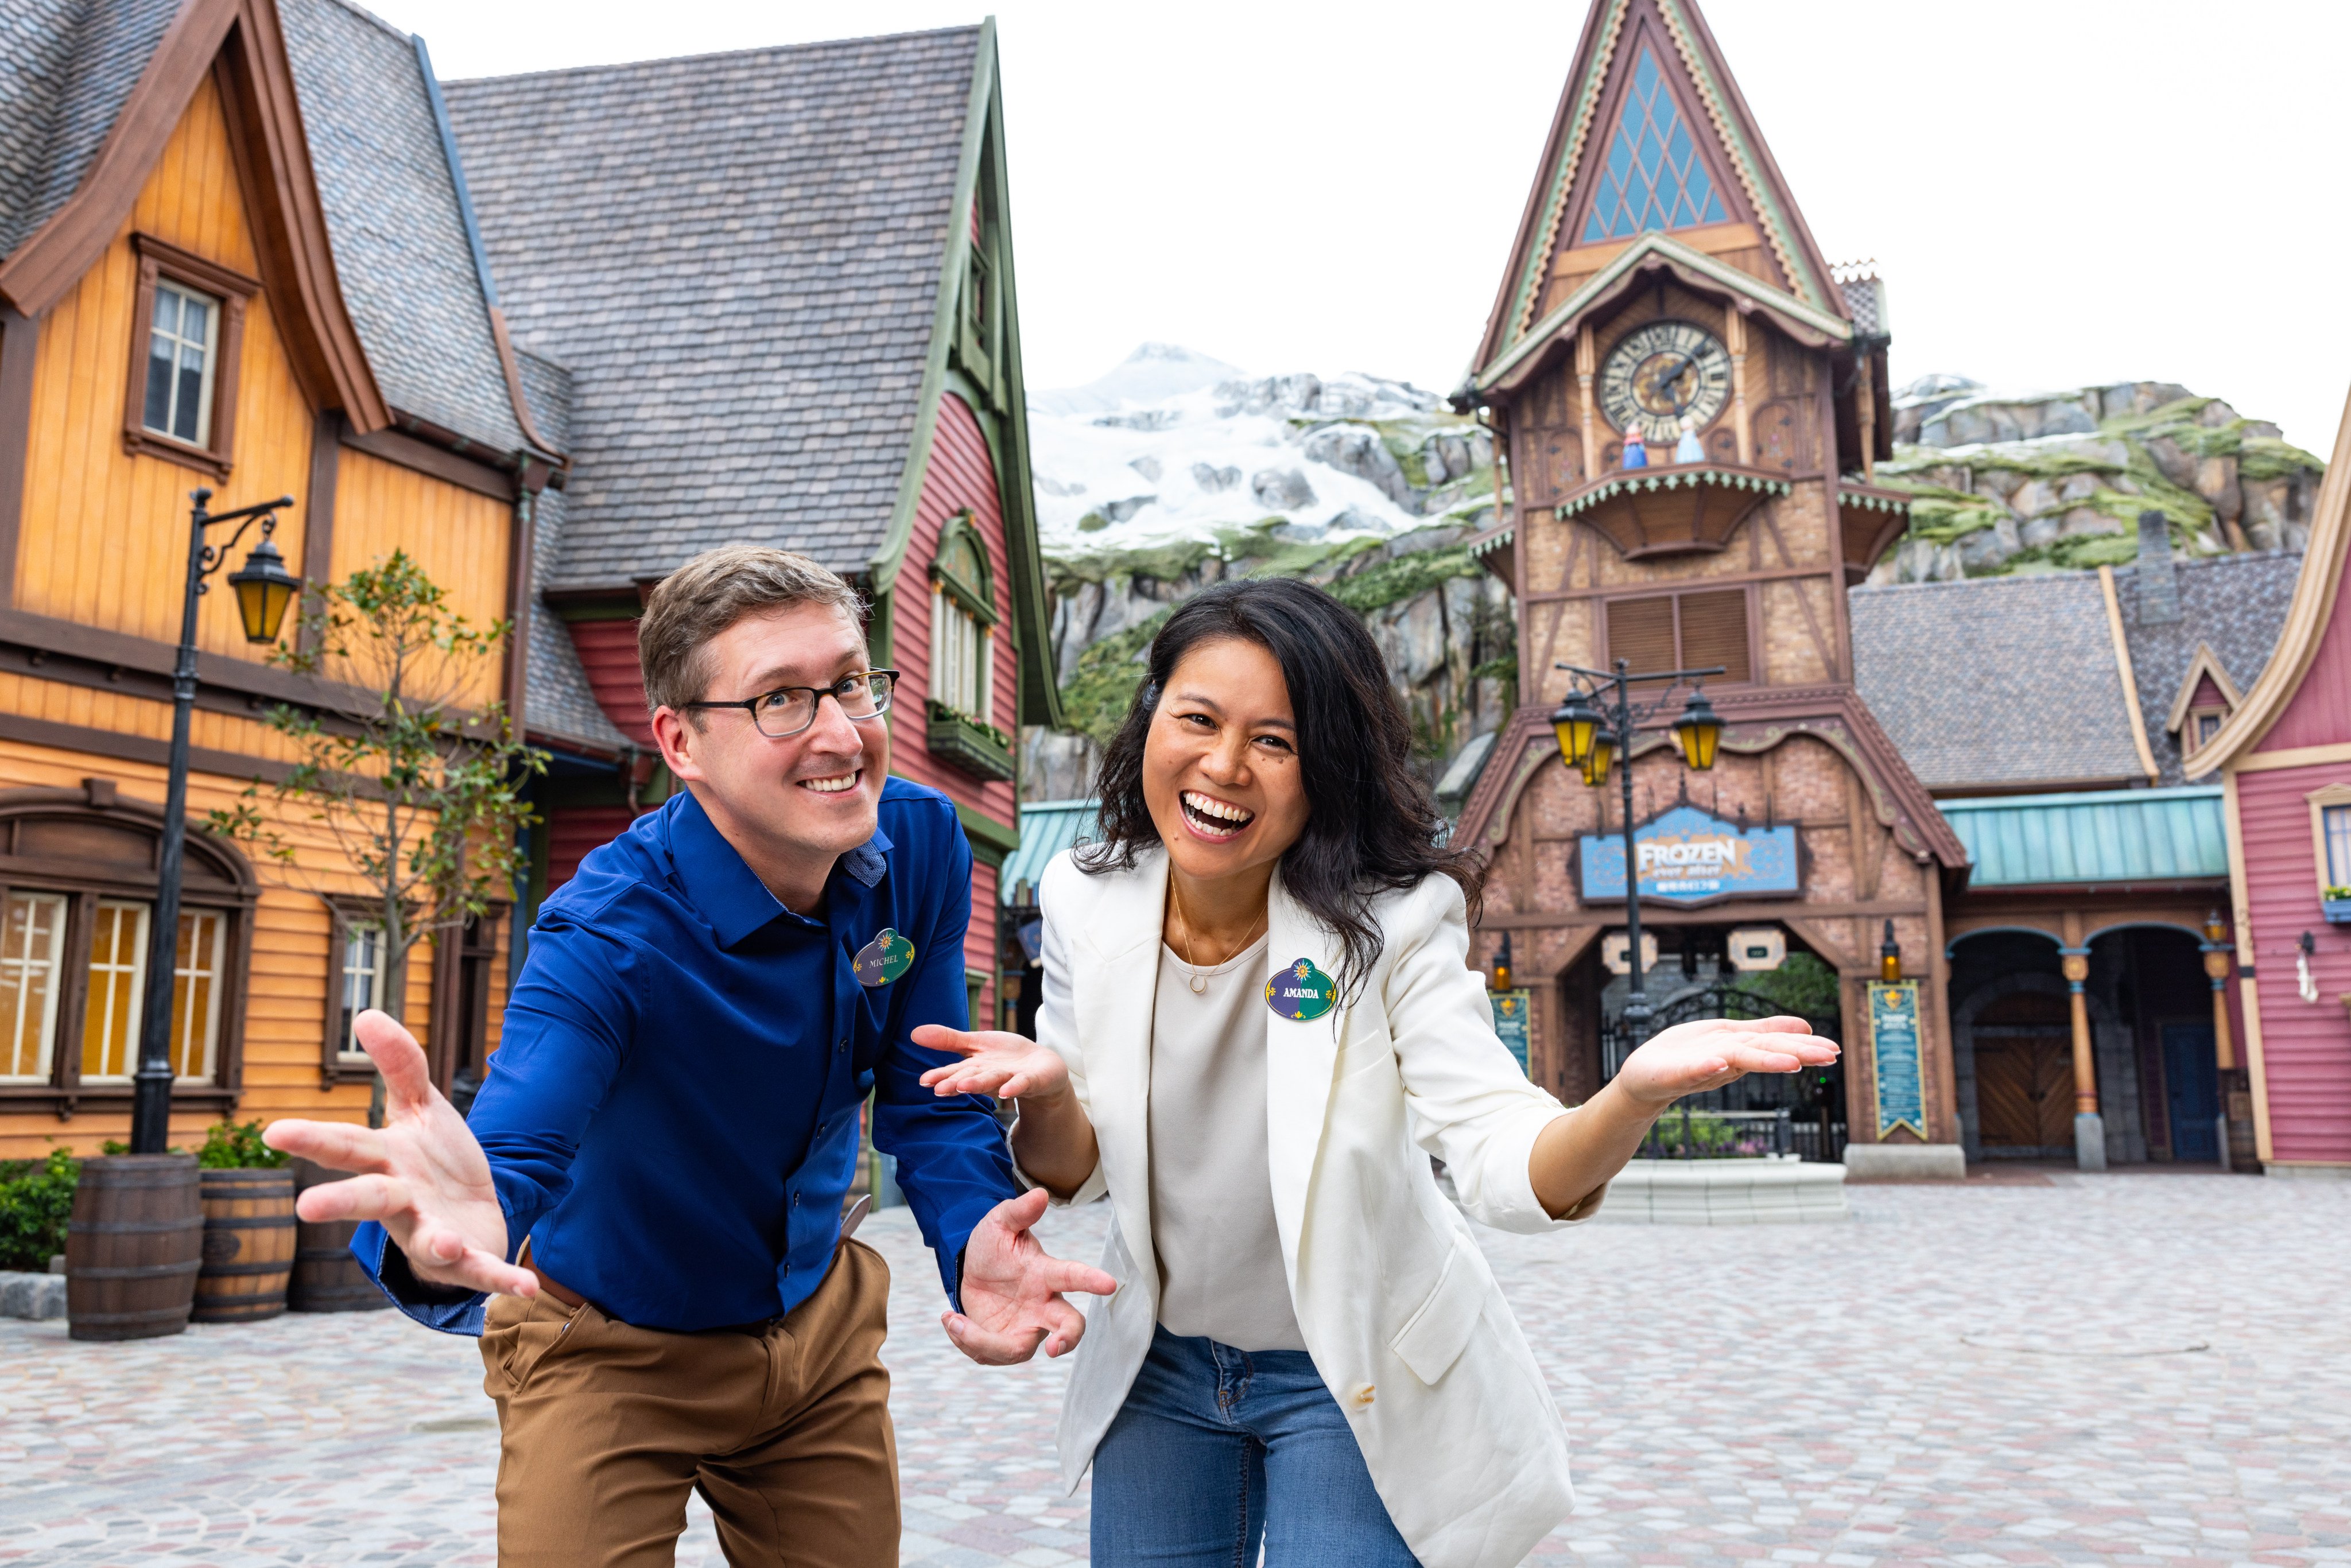 Michel den Dulk, executive creative director of Walt Disney Imagineering, and Amanda Chiu, senior producer of Walt Disney Imagineering, in the magical kingdom of Arendelle, which they helped to design at Hong Kong Disneyland’s new themed land, World of Frozen. 